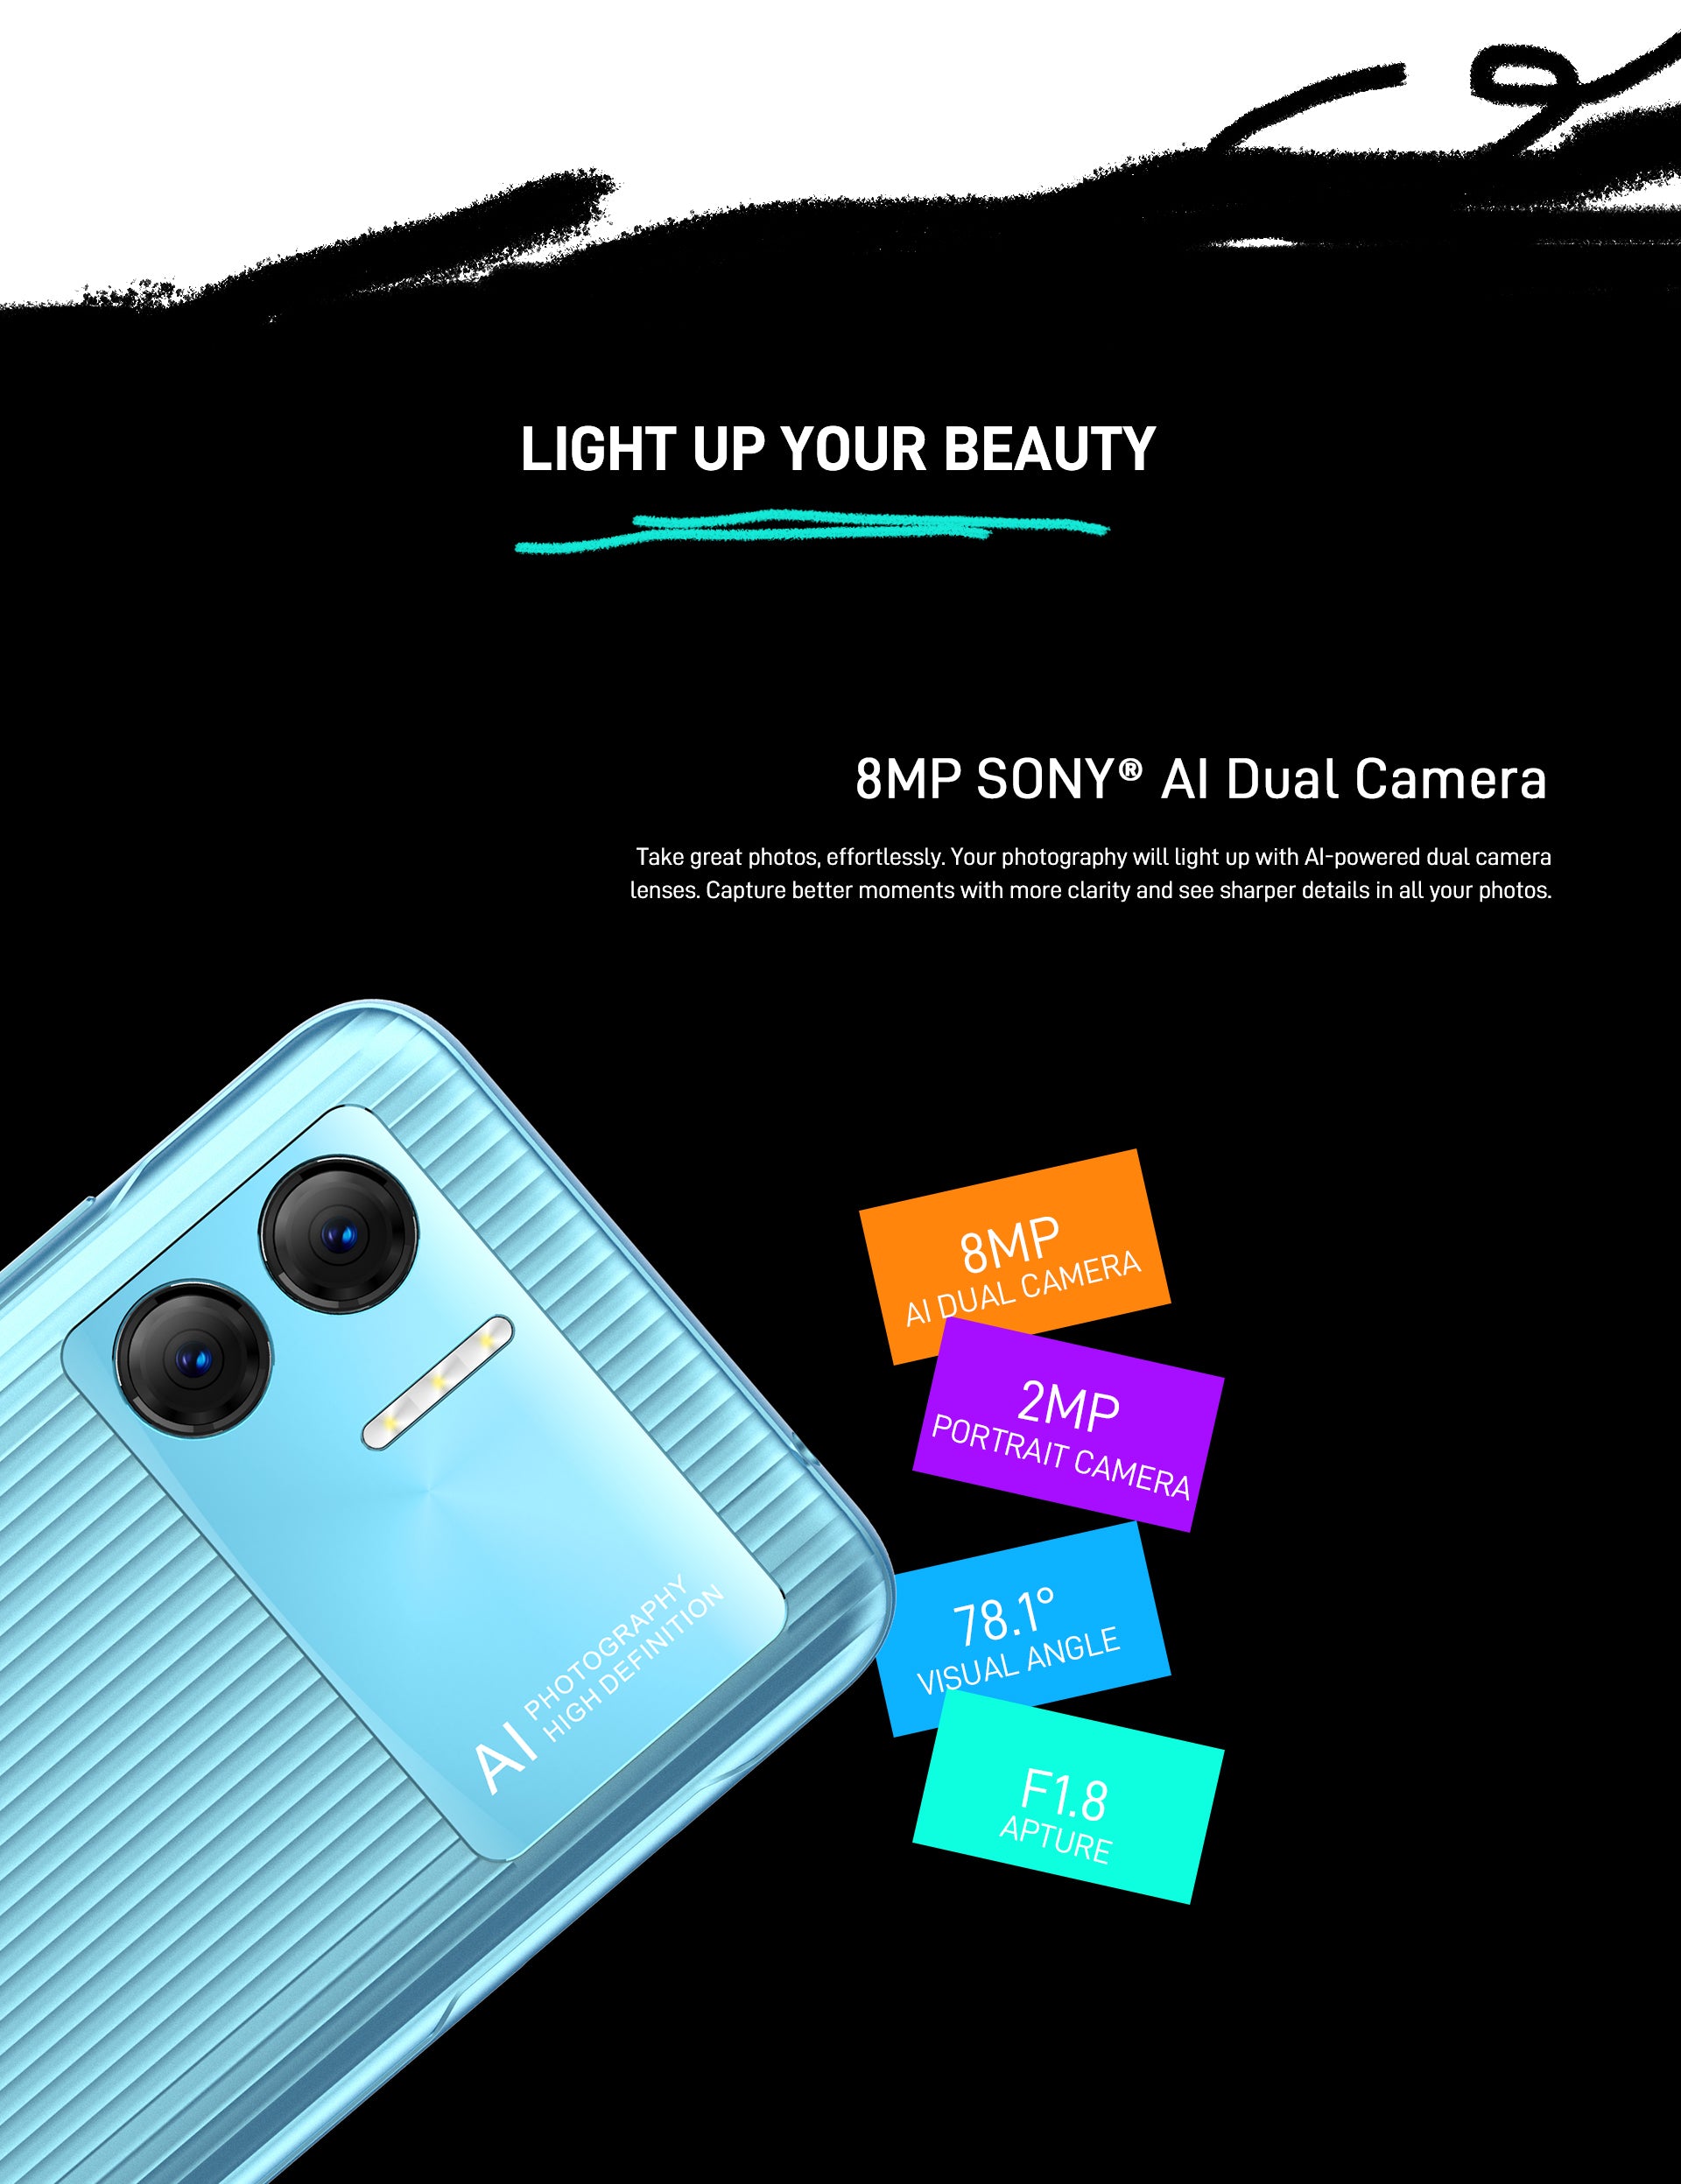 Light Up Your Beauty 8MP SONY® AI Dual Camera  Take great photos, effortlessly. Your photography will light up with AI-powered dual camera lenses. Capture better moments with more clarity and see sharper details in all your photos.  -8MP AI Dual Camera  -2MP Portrait Camera  -78.1° Visual Angle  -F1.8 Apture